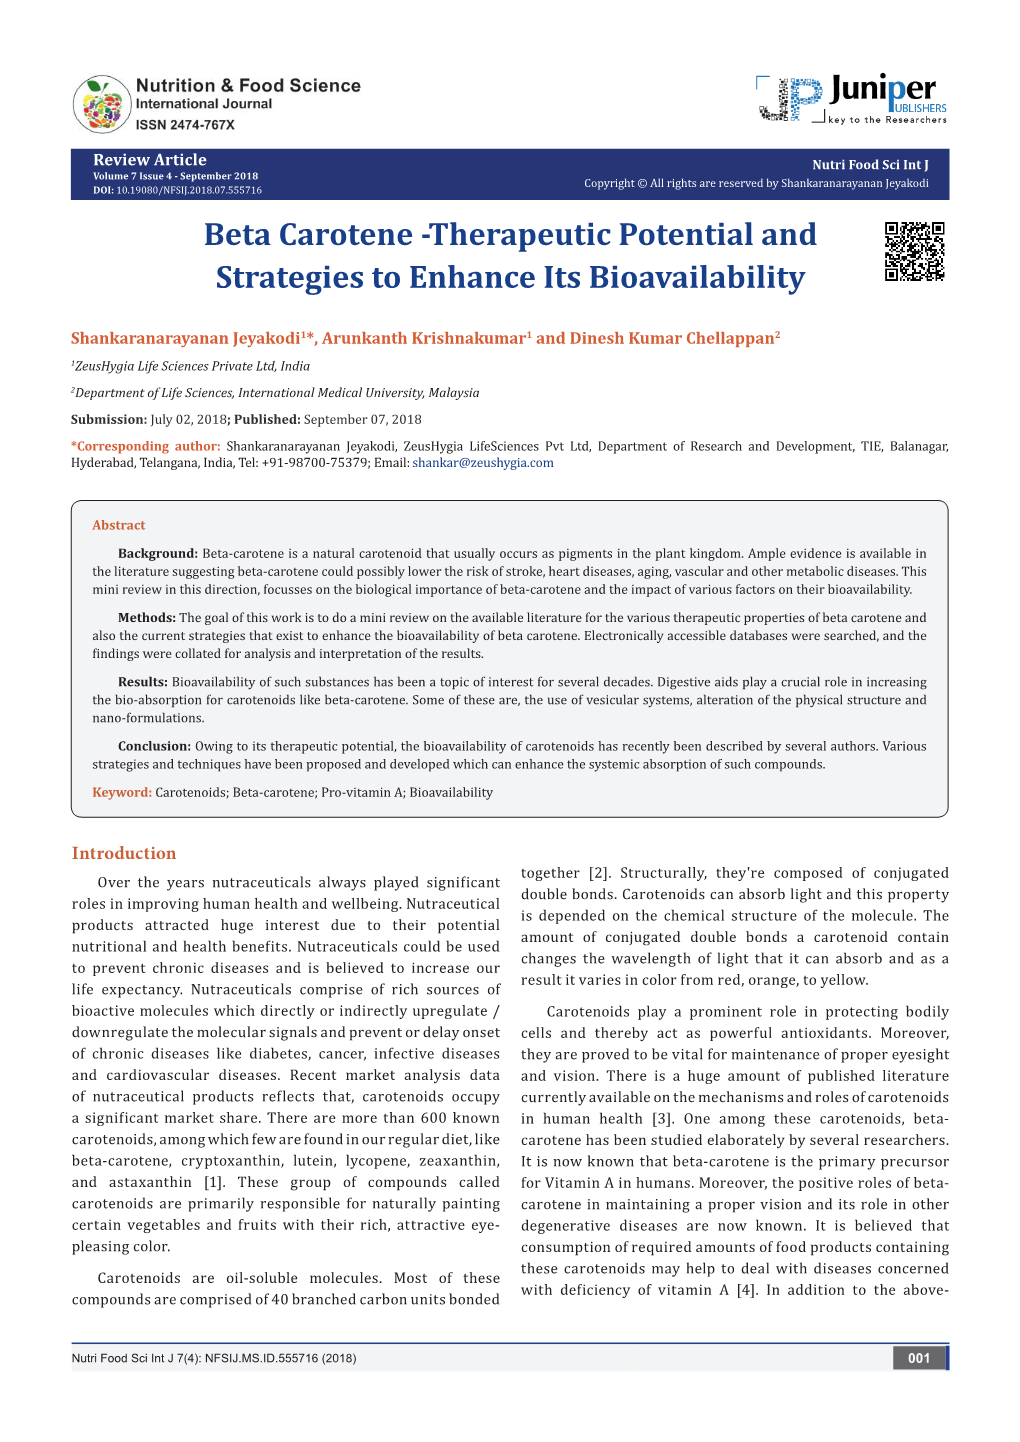 Beta Carotene -Therapeutic Potential and Strategies to Enhance Its Bioavailability